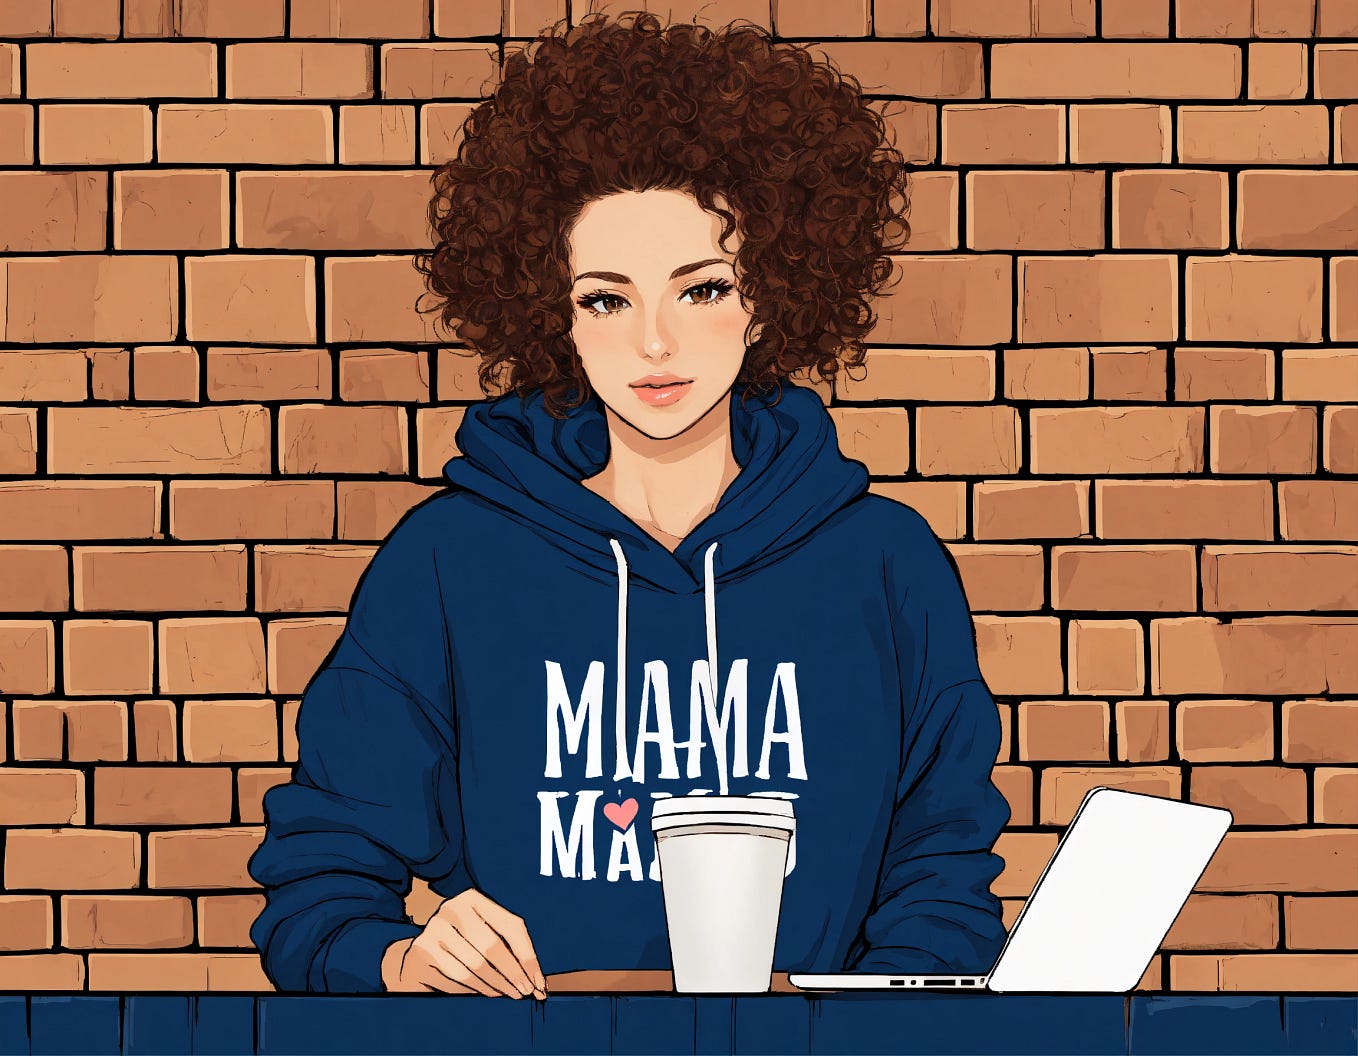 graphic illustration woman with light brown eyes, curly messy bun light brown hair, holding a sparkly white tumbler and wearing a navy blue hoodie sweatshirt that says Mama, sitting against a brick wall background. The brick wall has a laptop, a heat press, a couple of tumblers sitting on it illustration drawing.